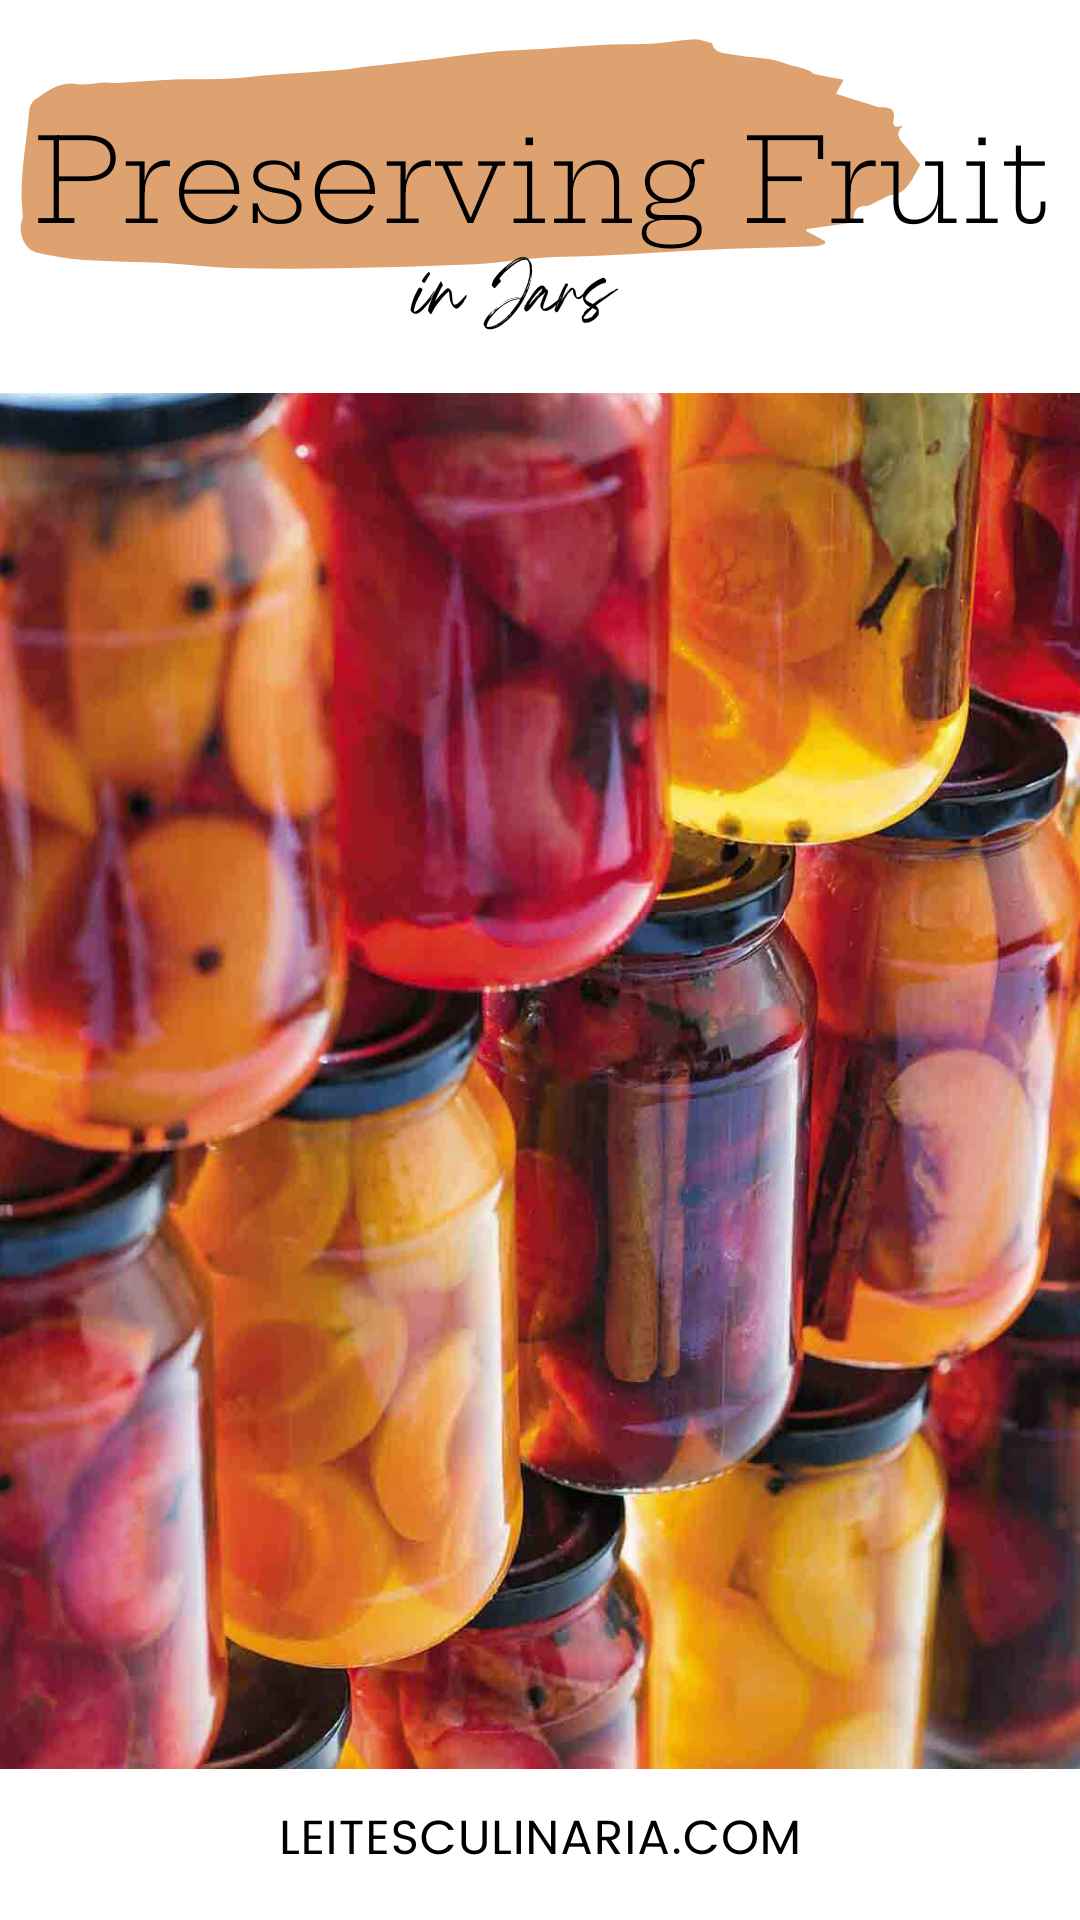 Stacked jars of preserved stone fruits.